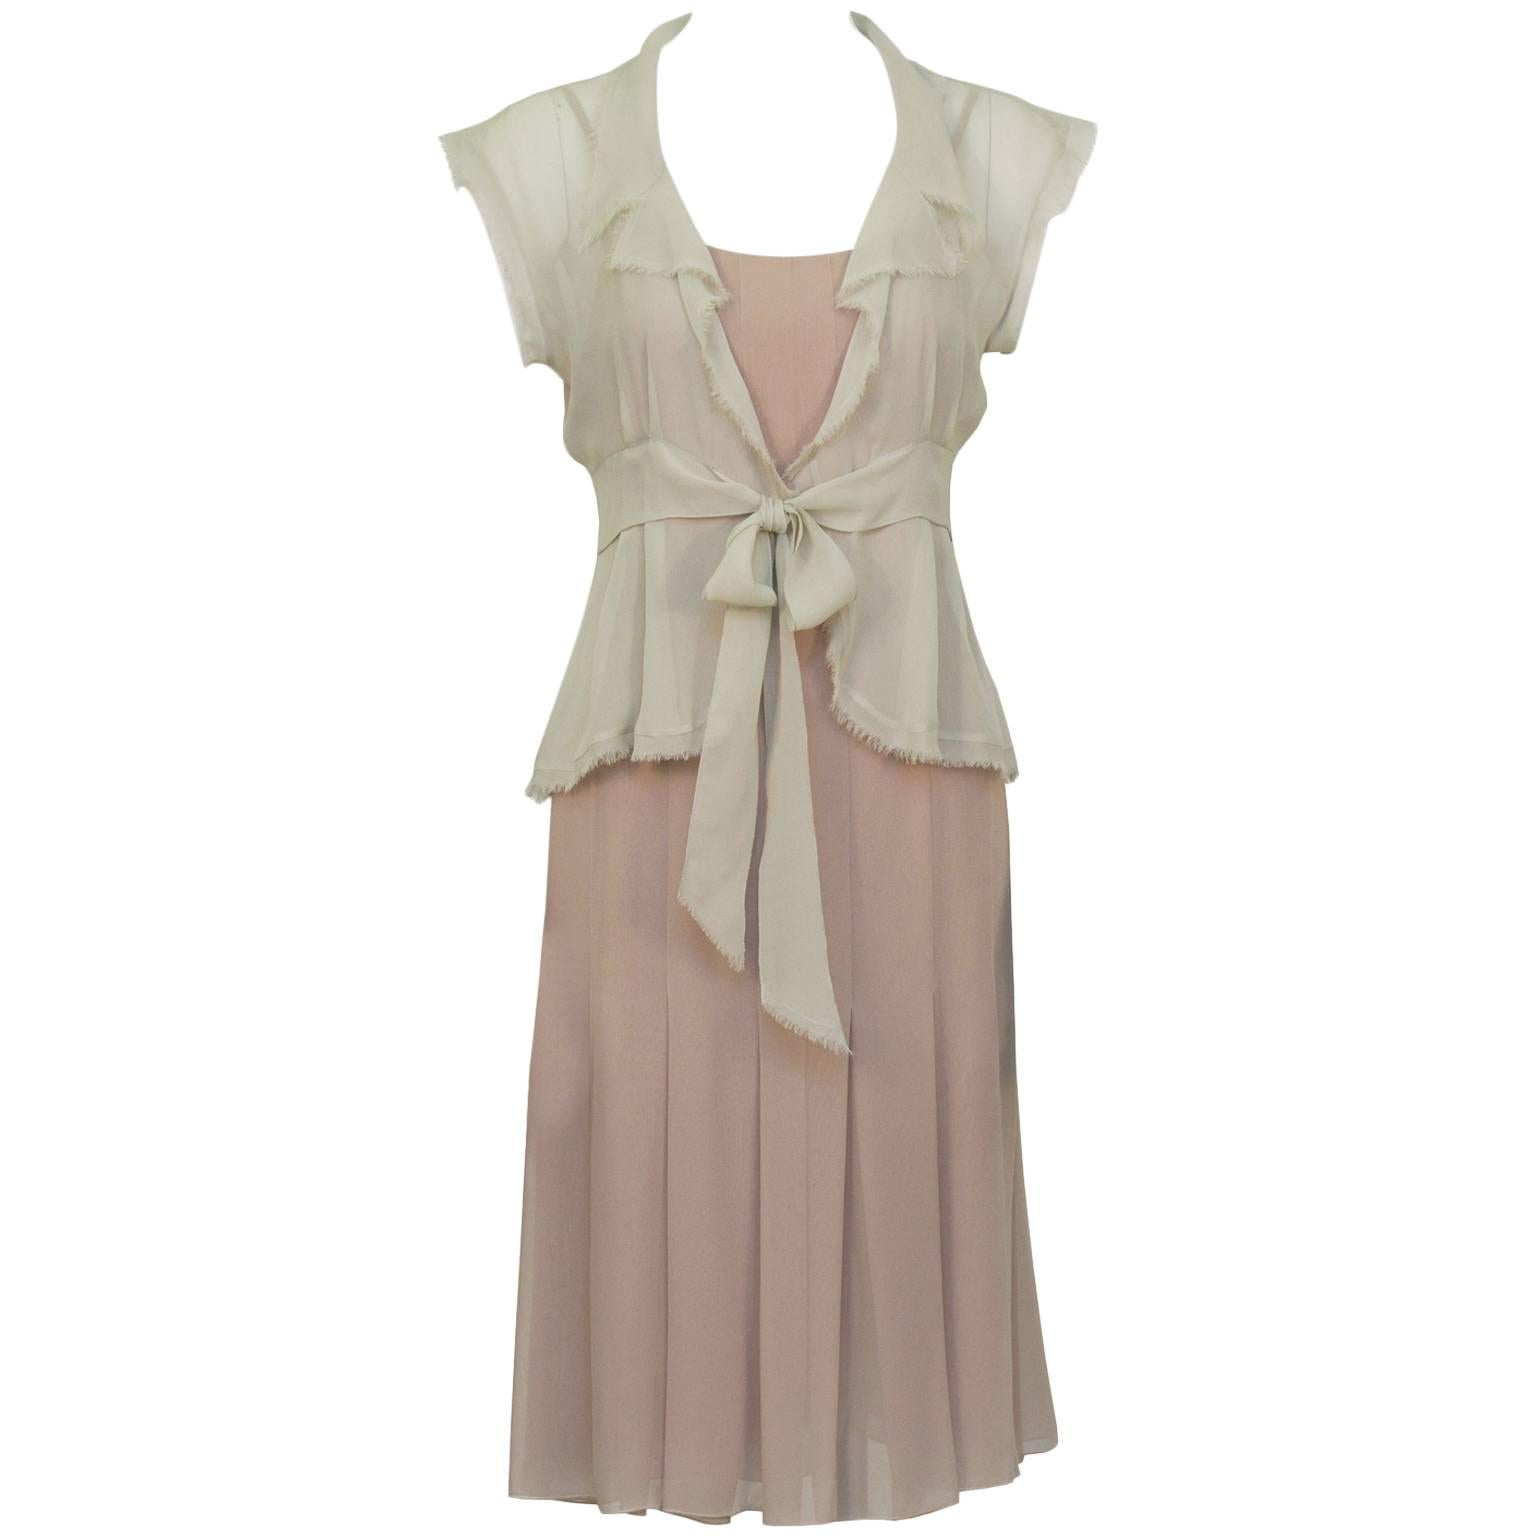 Chanel 2004 Spring Celadon and Beige Chiffon Dress and Vest For Sale